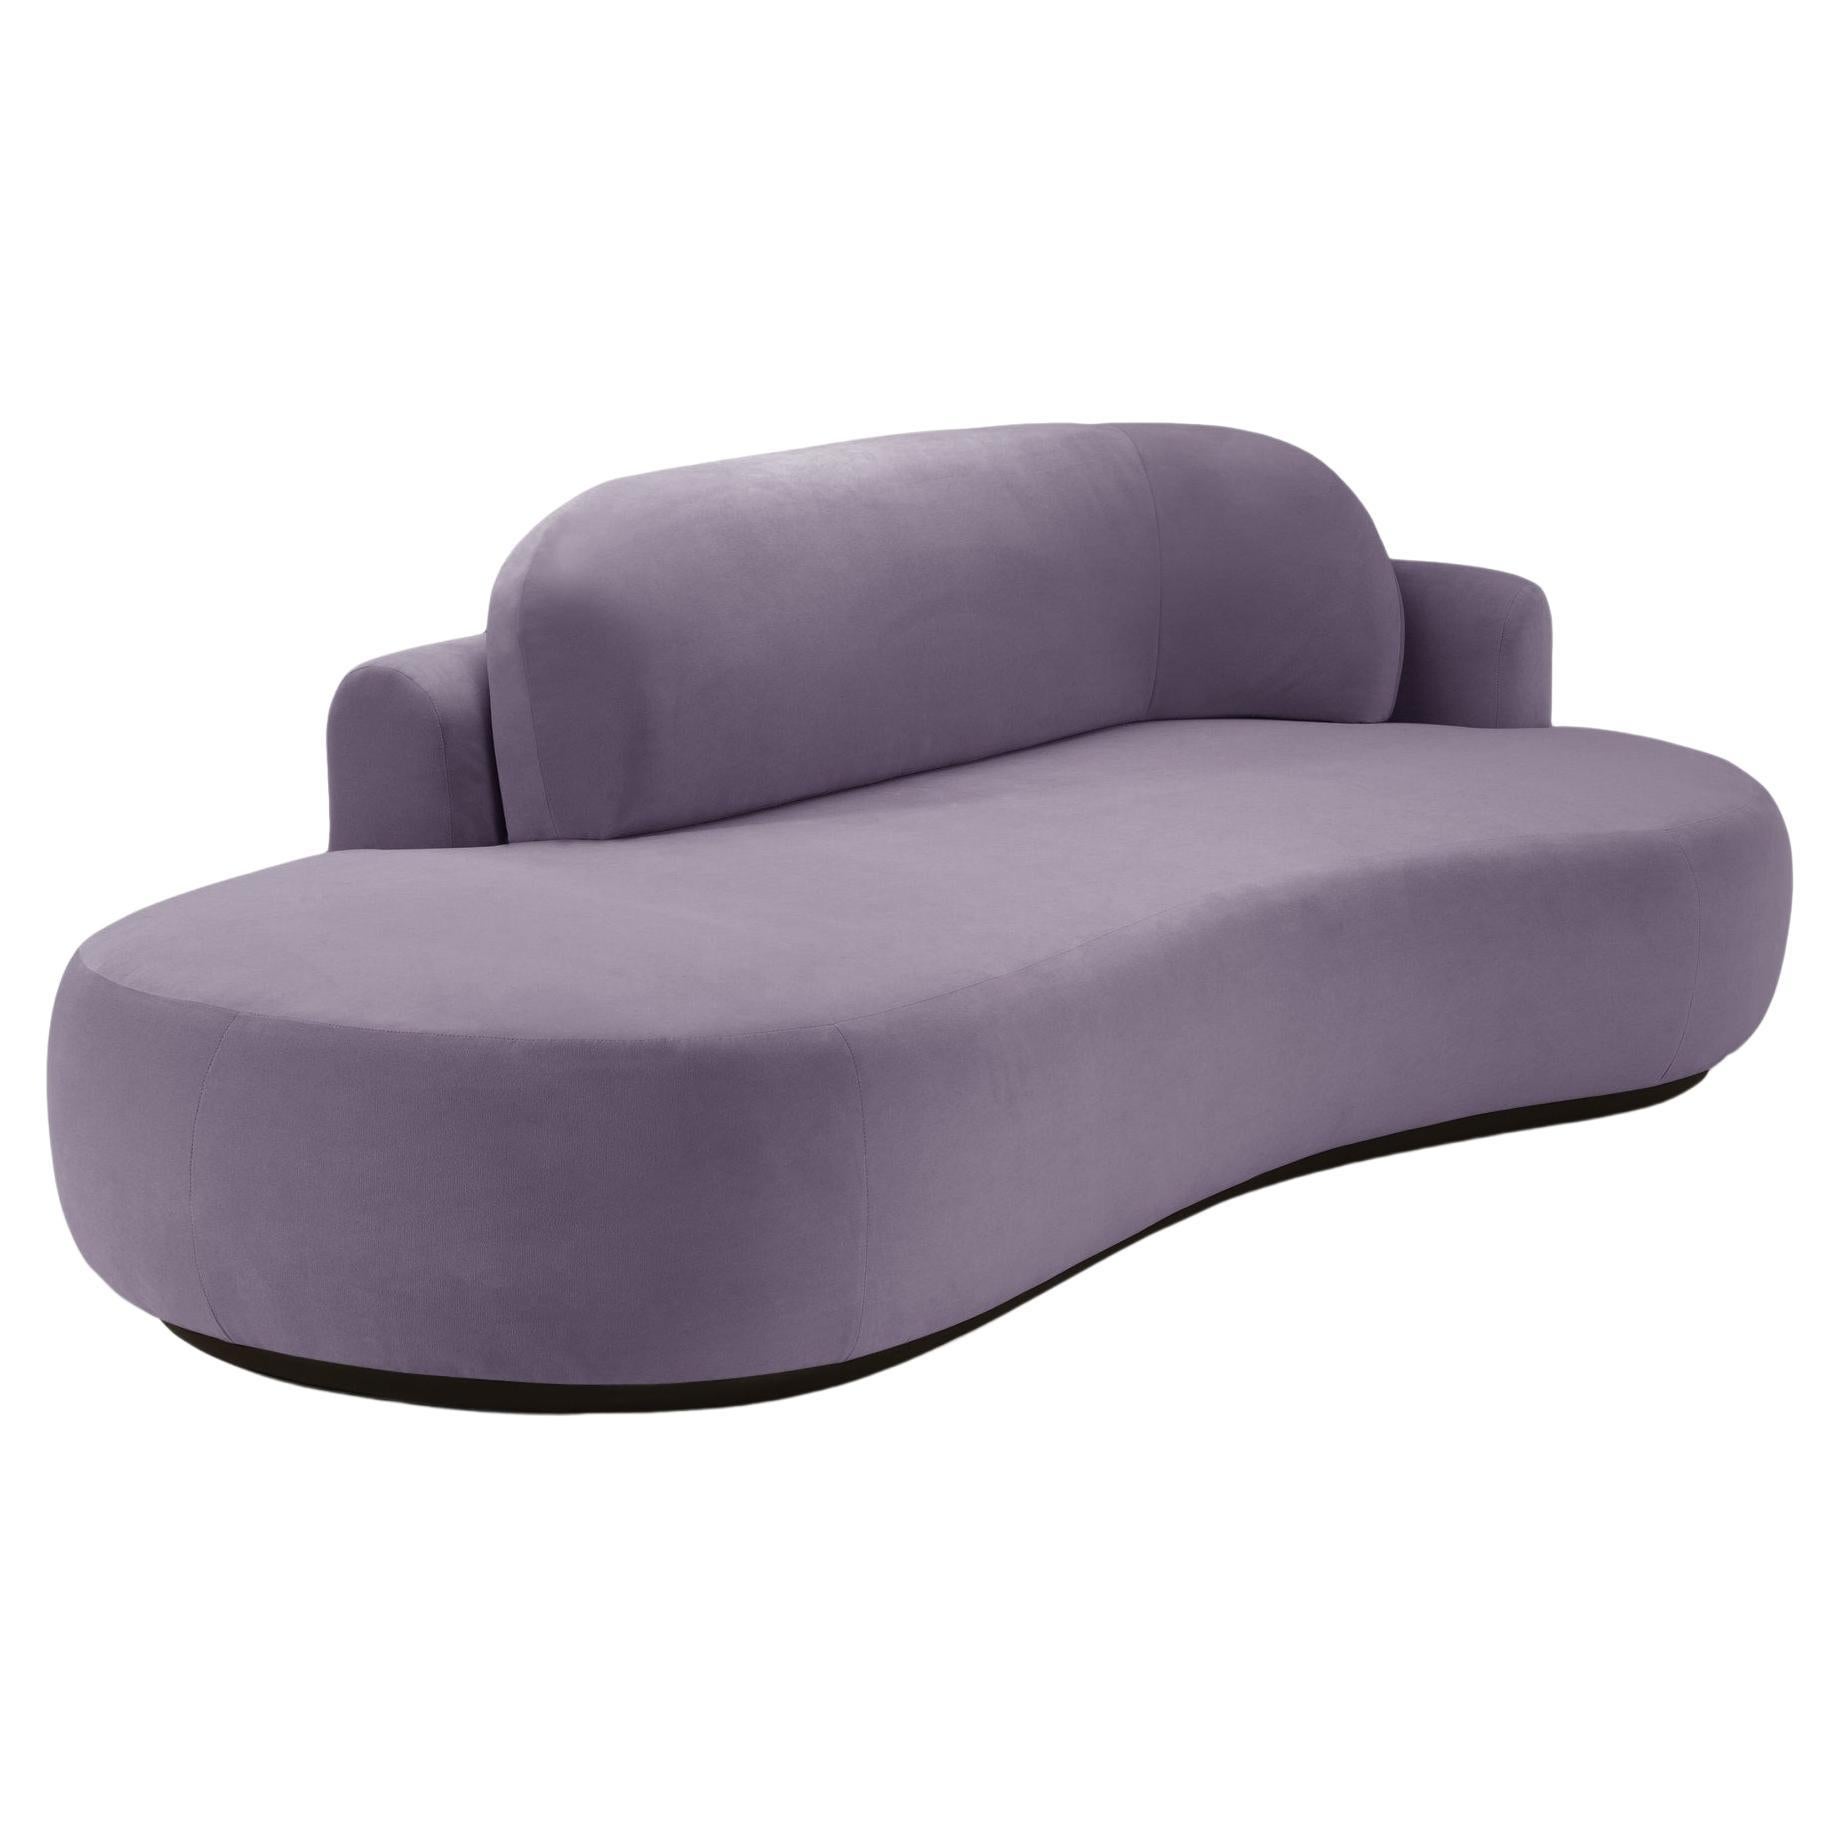 Naked Sofa Single with Beech Ash-056-5 and Paris Lavanda For Sale